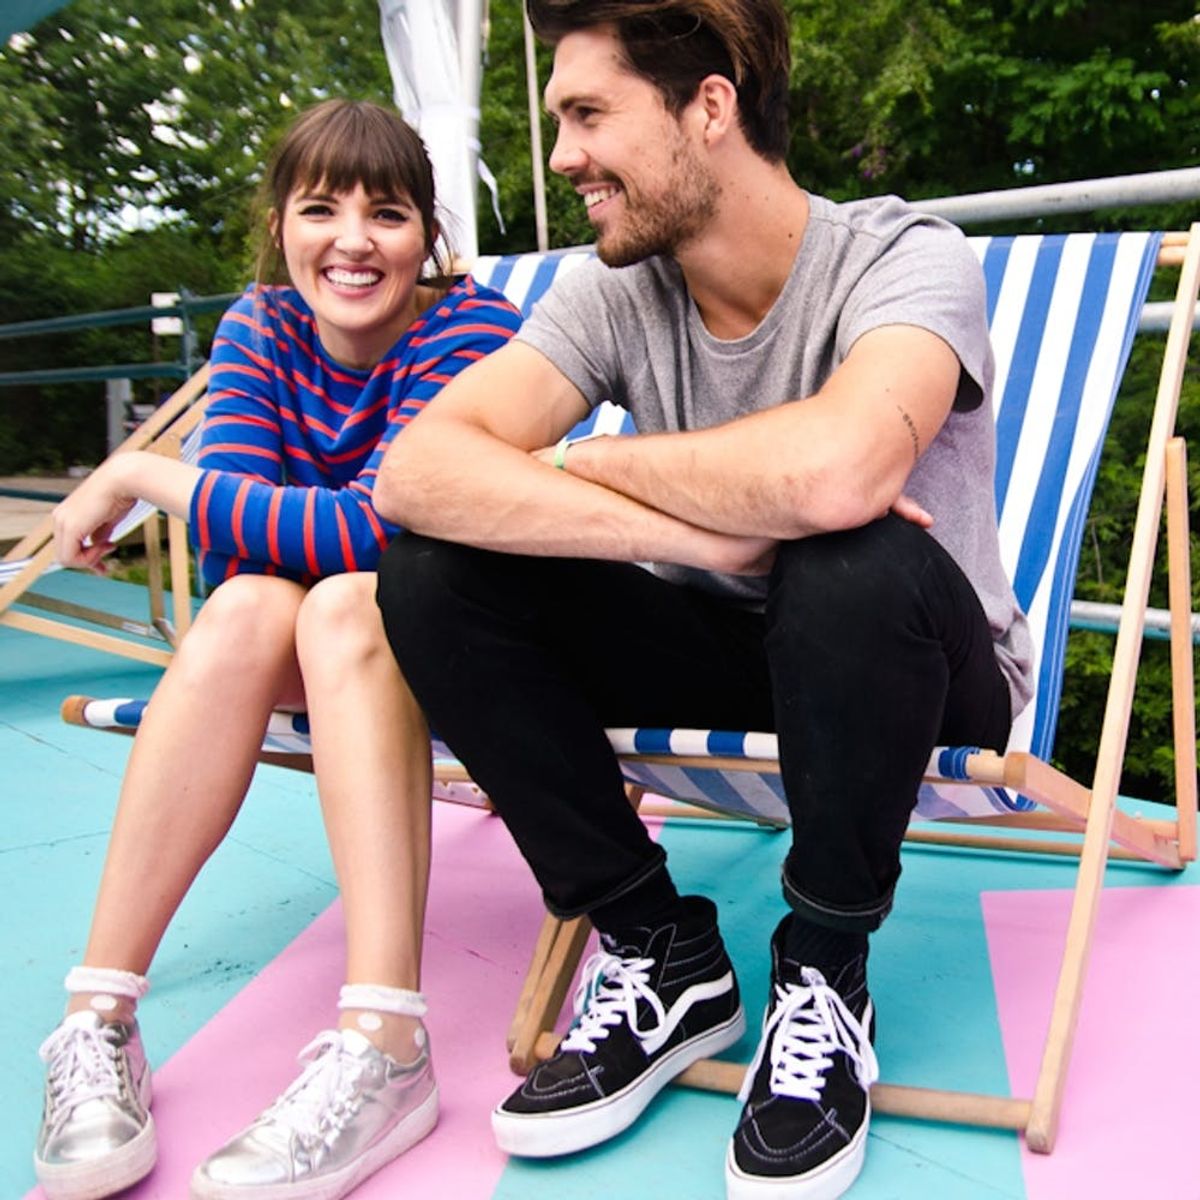 British Pop Duo Oh Wonder Reveal the Travel Beauty Secrets You MUST Know